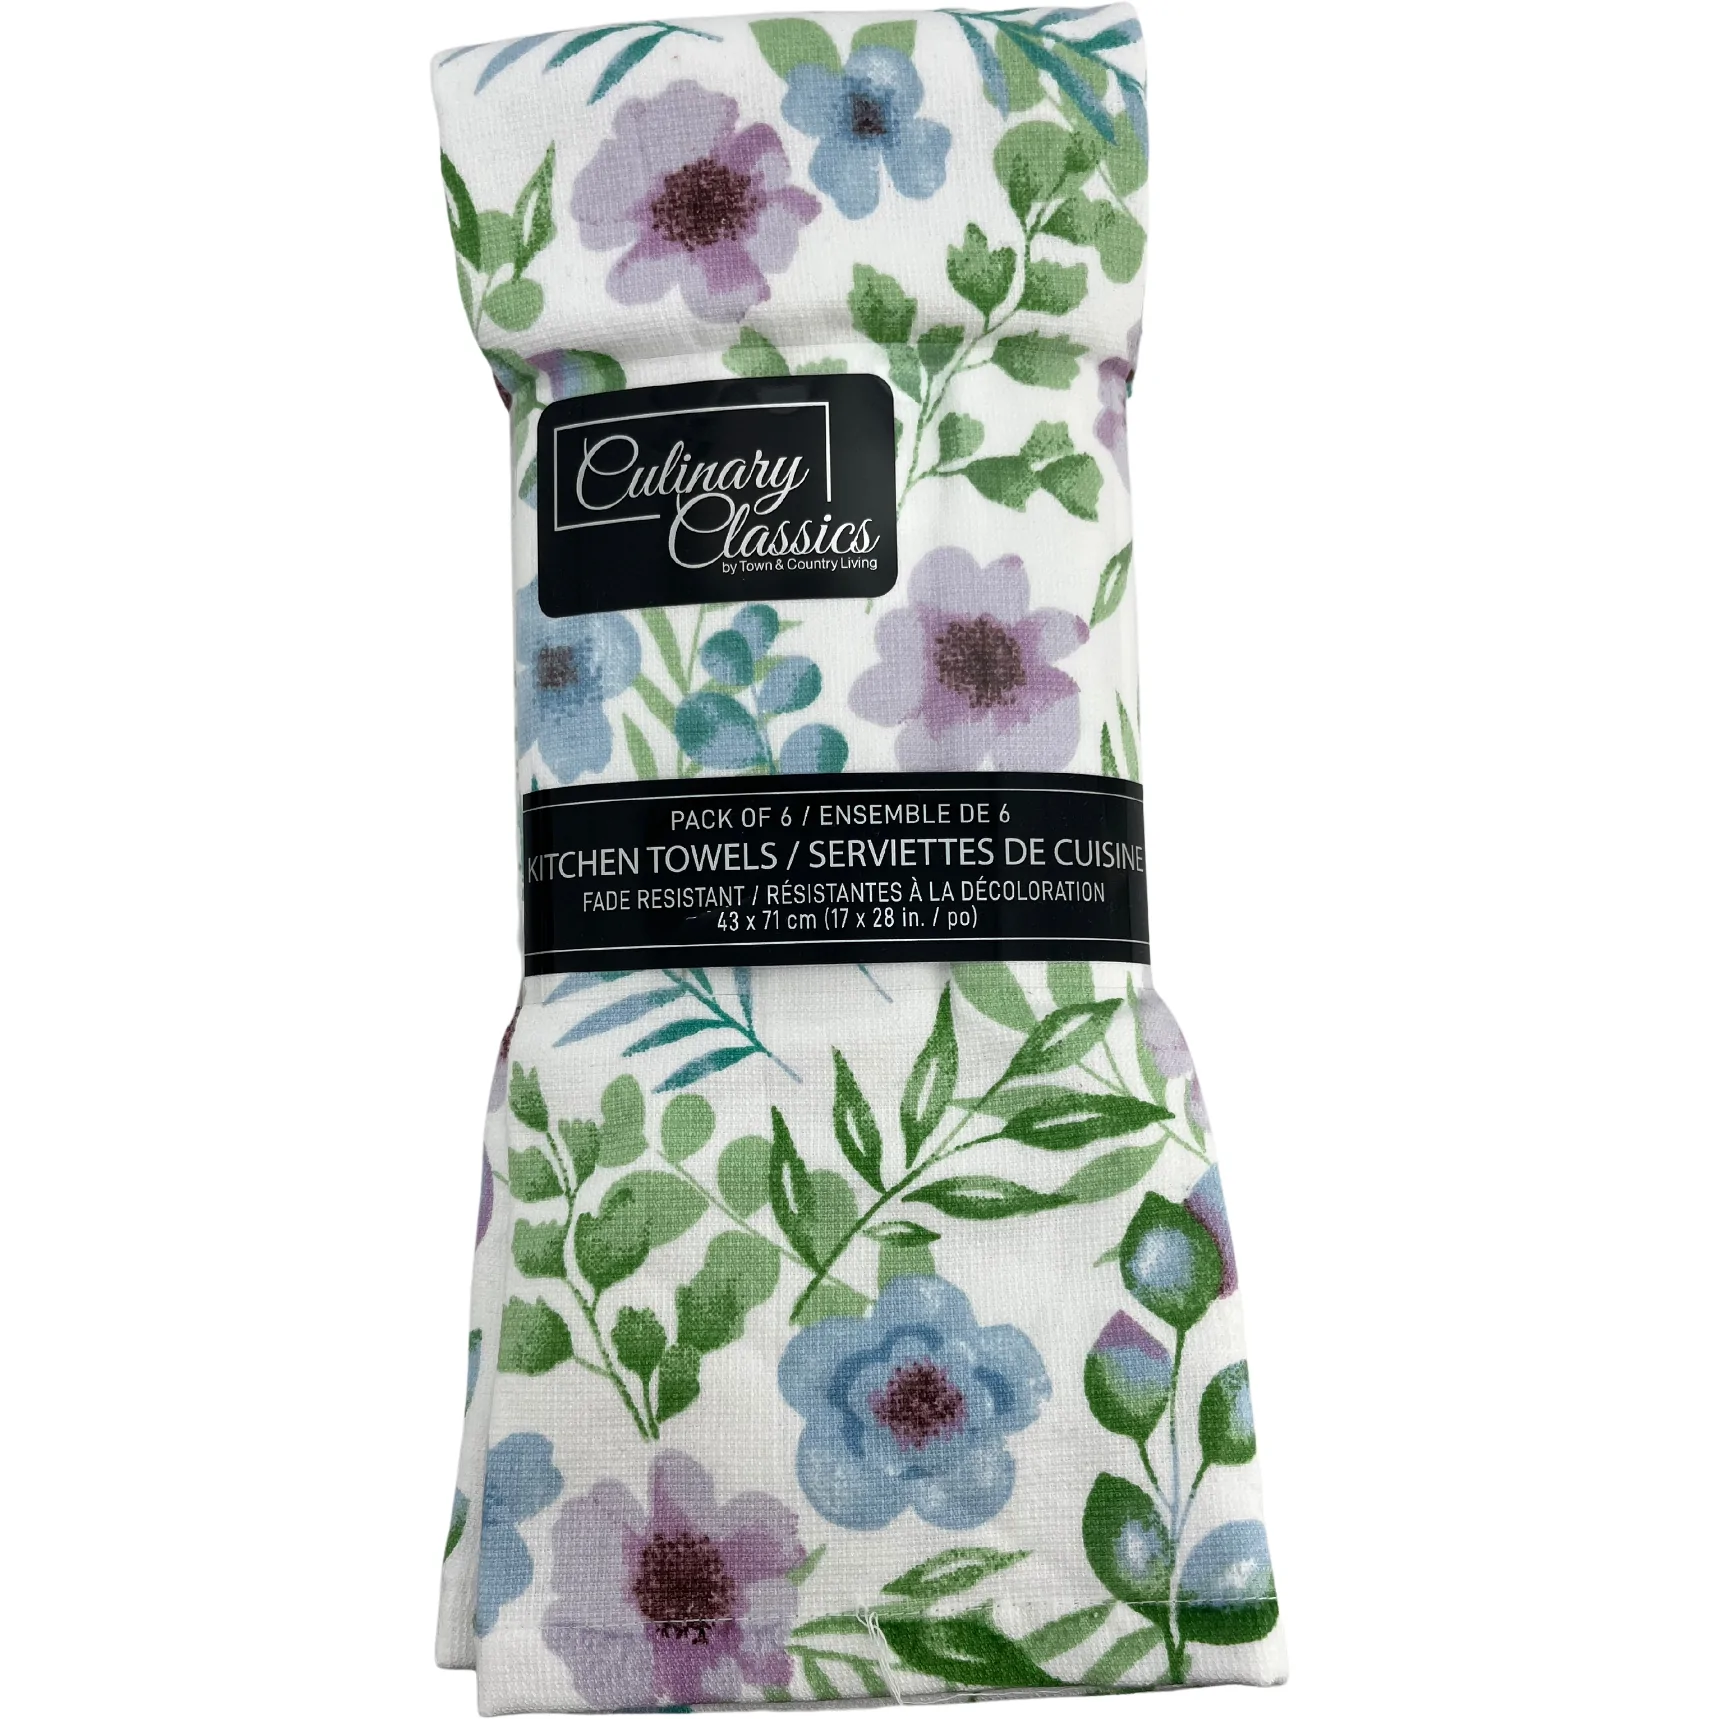 Culinary Classics Kitchen Towels / Hand Towels / Pack of 6 / Floral Themed